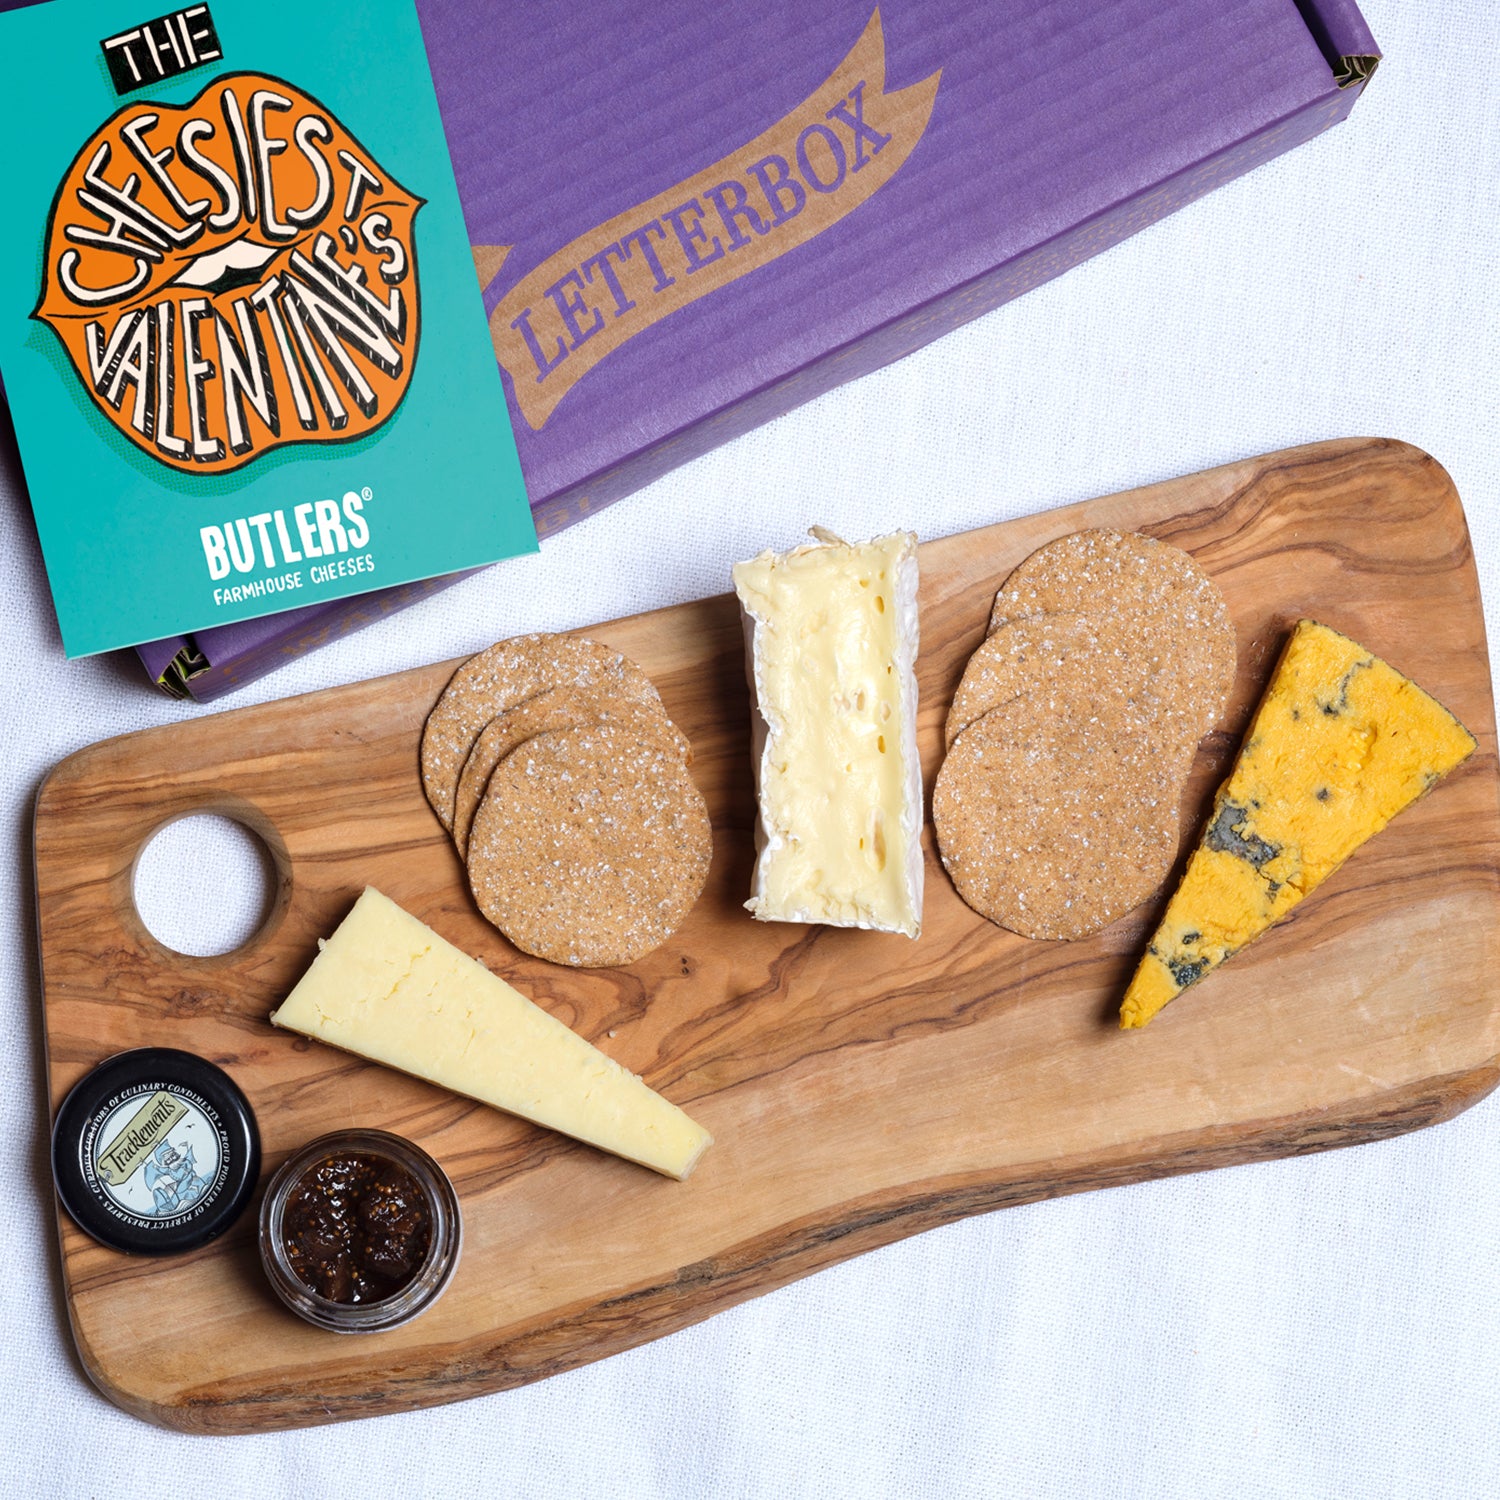 Overhead shot of the Perfect British Valentine's Cheeseboard with Crackers & Chutney on a cheeseboard